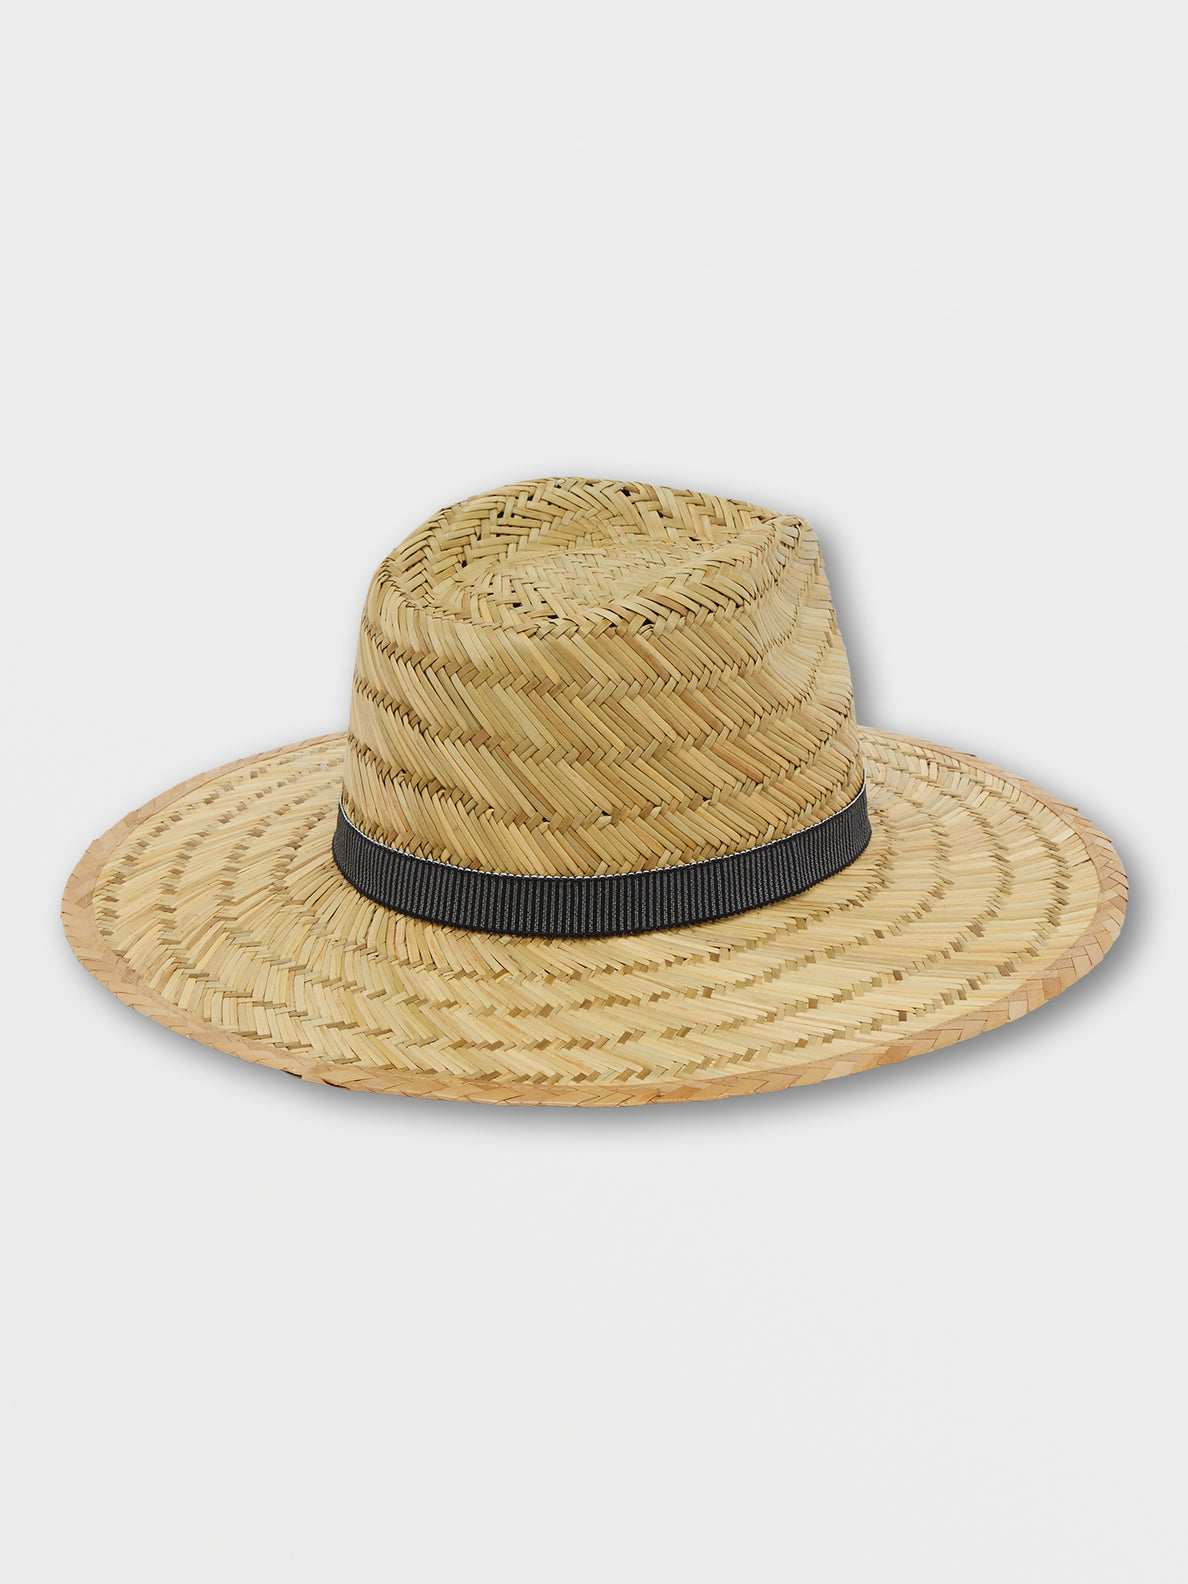 Volcom - Girls Throw Lil Shade Hat in Natural